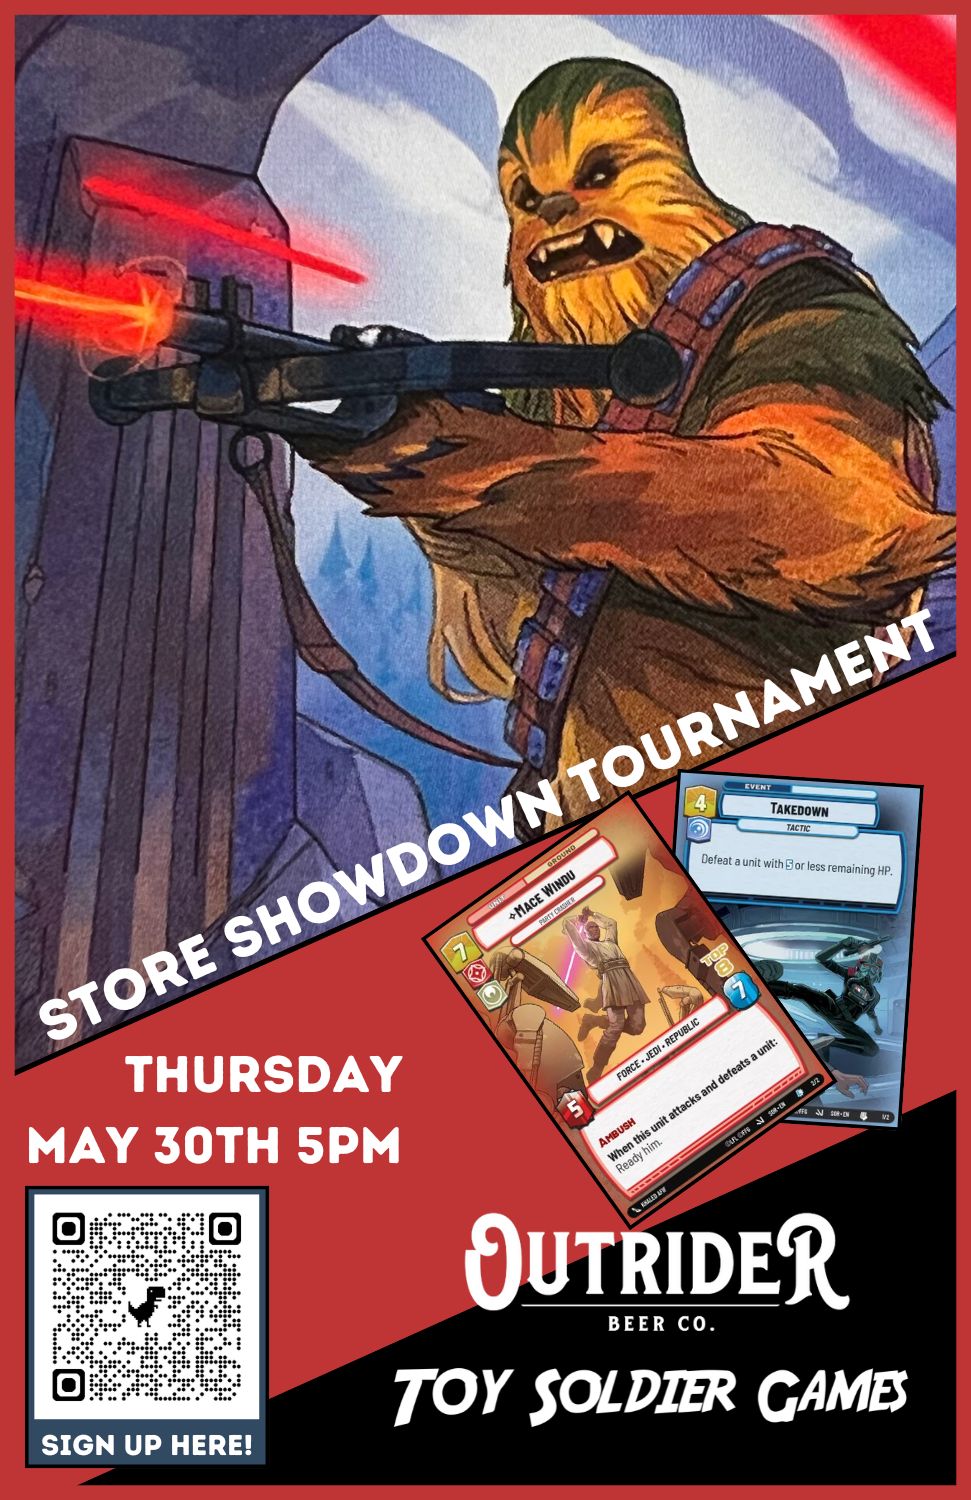 Store Showdown at the Brewery :: A SWU Event